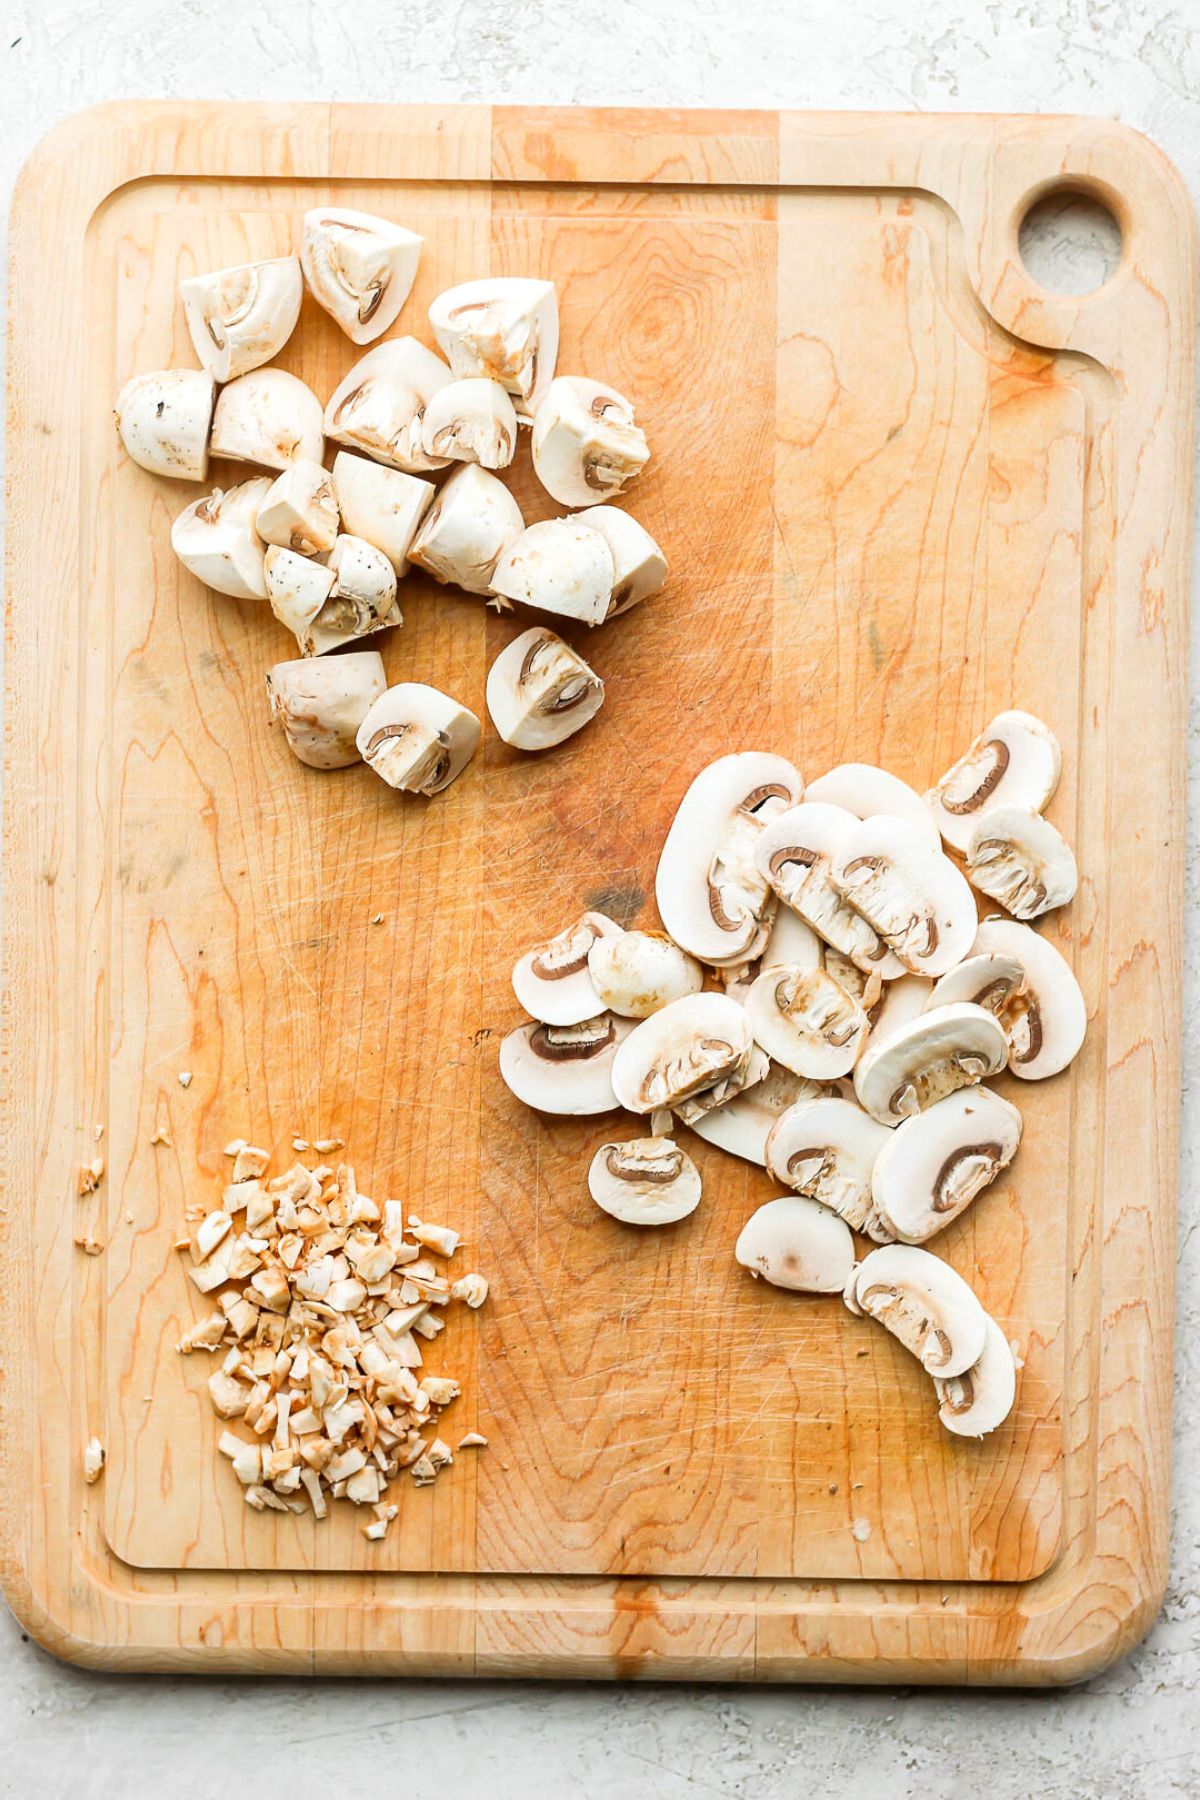 Cutting board with 3 different types of cut mushrooms: quartered, sliced, and minced.